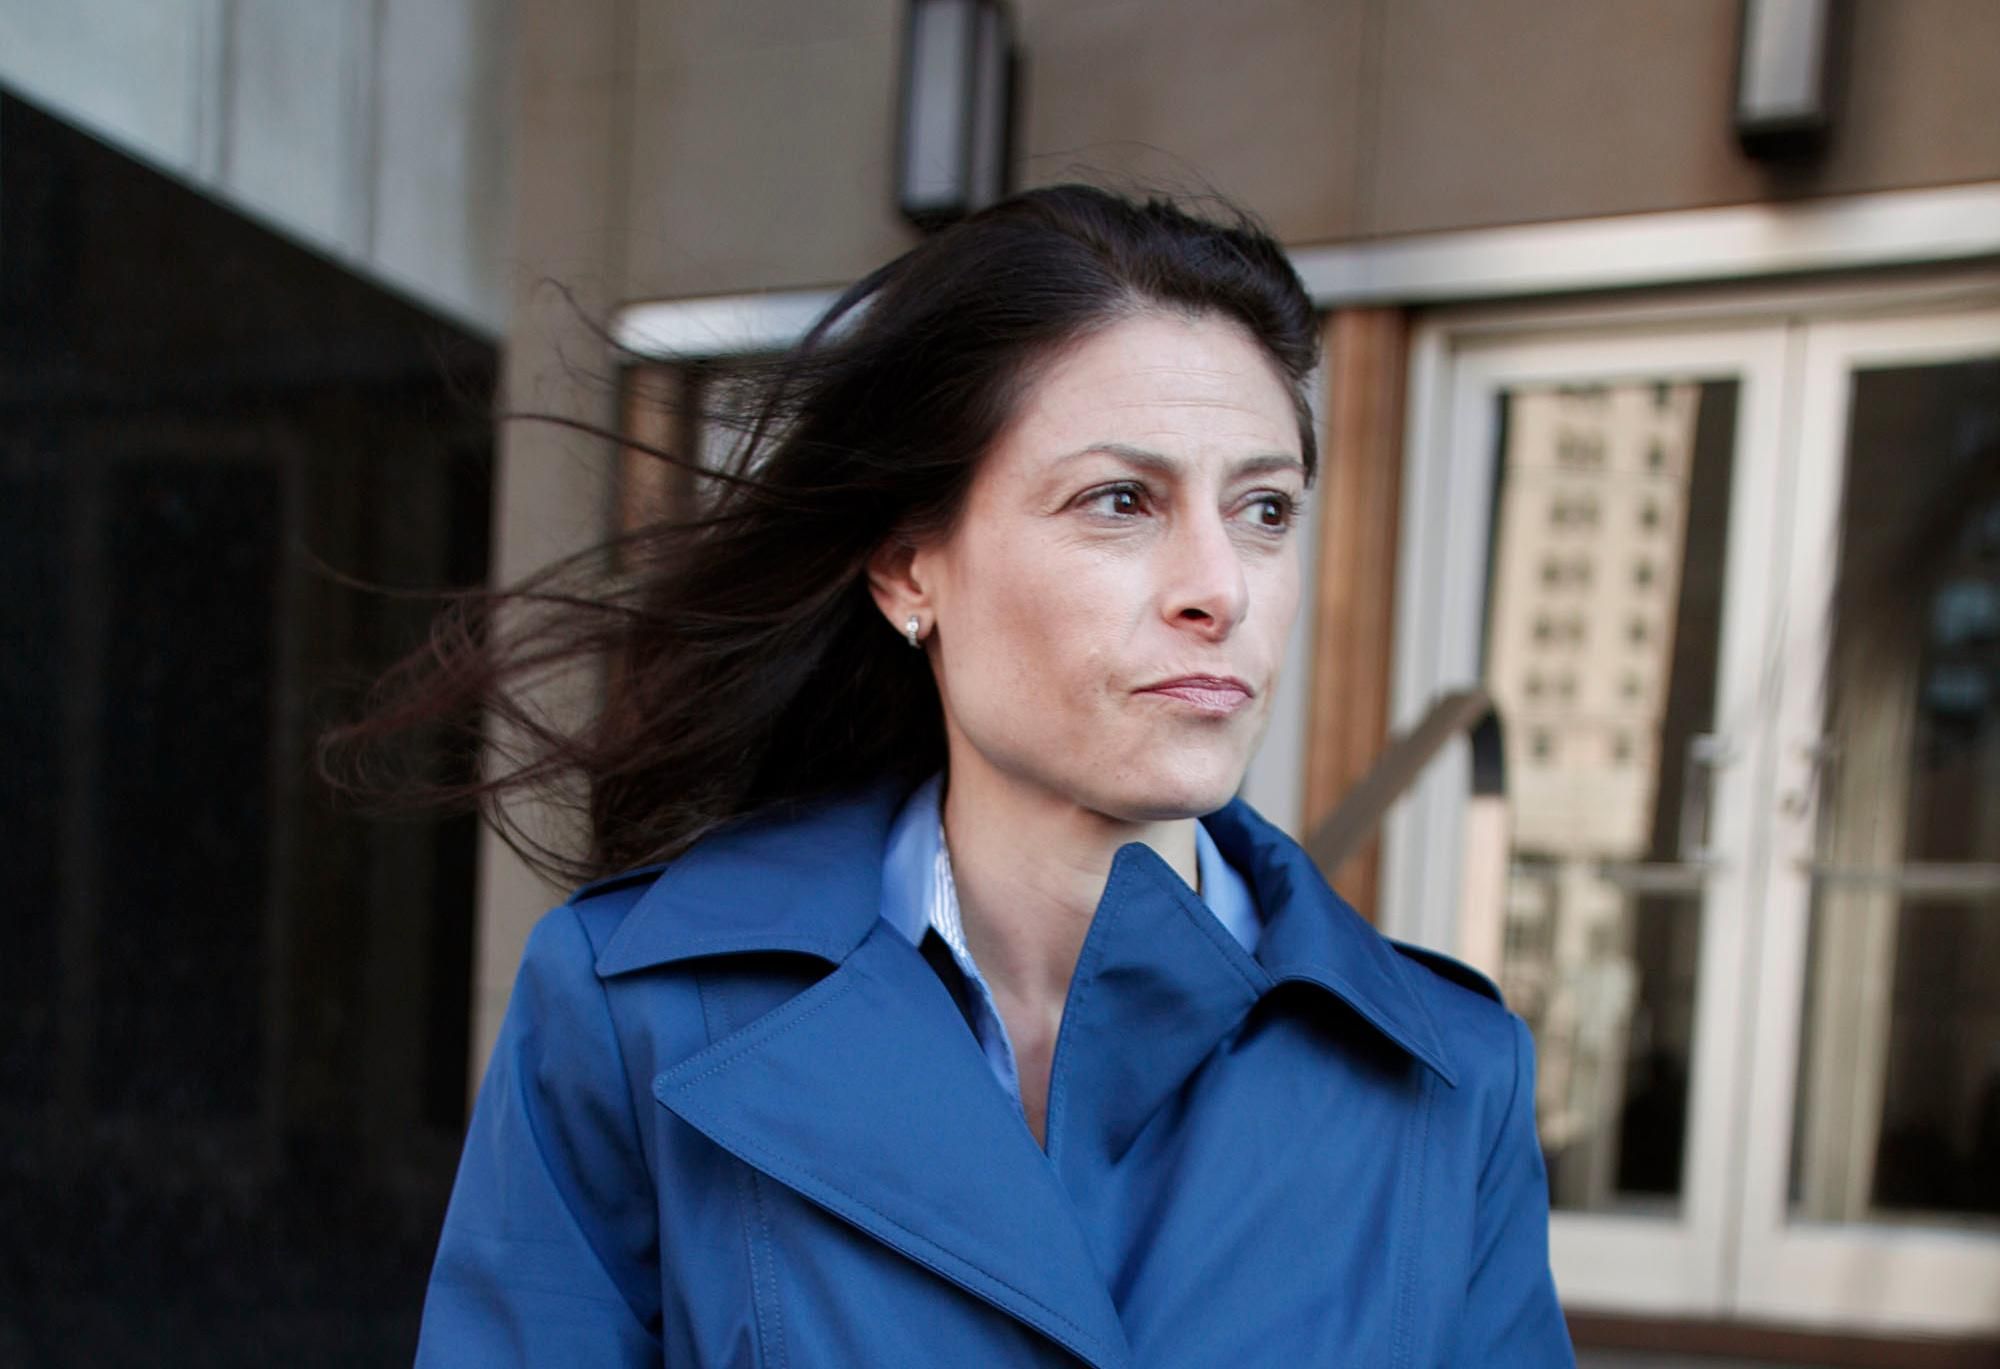 Dana Nessel talks to reporters outside a federal courthouse in Detroit, Michigan on October 16, 2013, five years before she was elected attorney general of the state. 